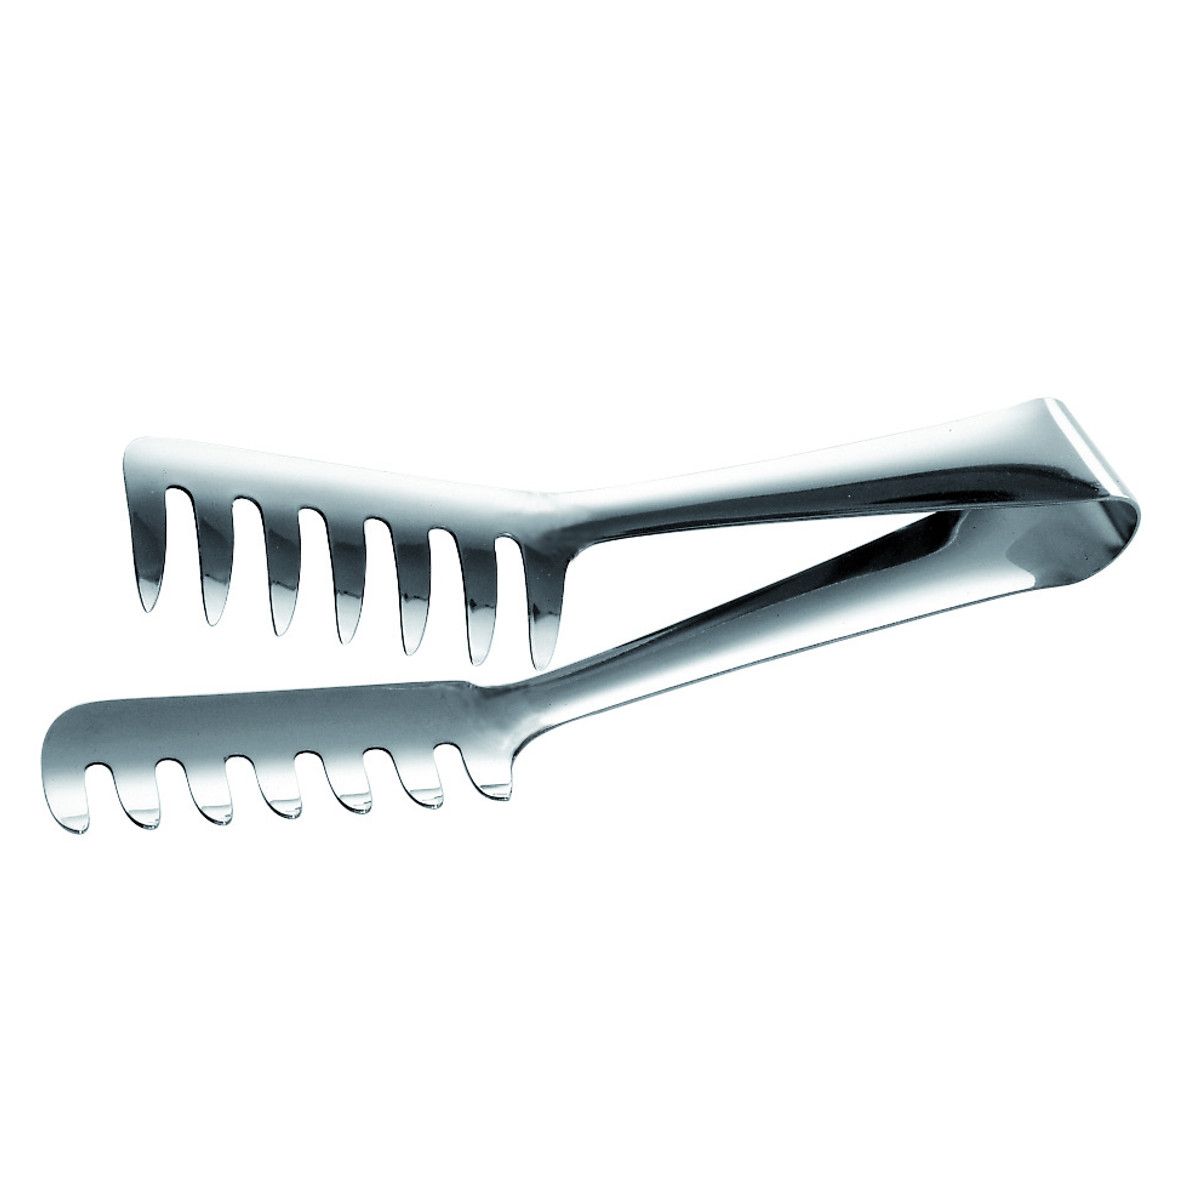 Piazza Stainless-Steel Pasta Tongs